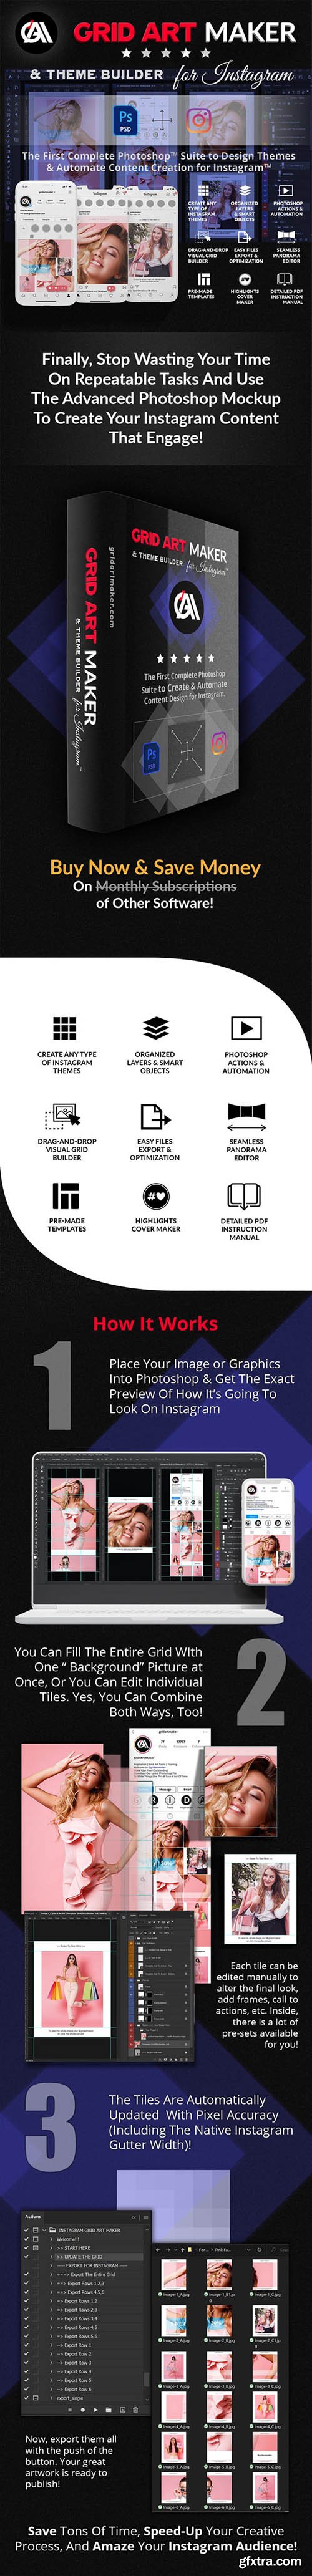 GraphicRiver - Instagram Grid Art Maker - All-In-One Photoshop Suite 30243603